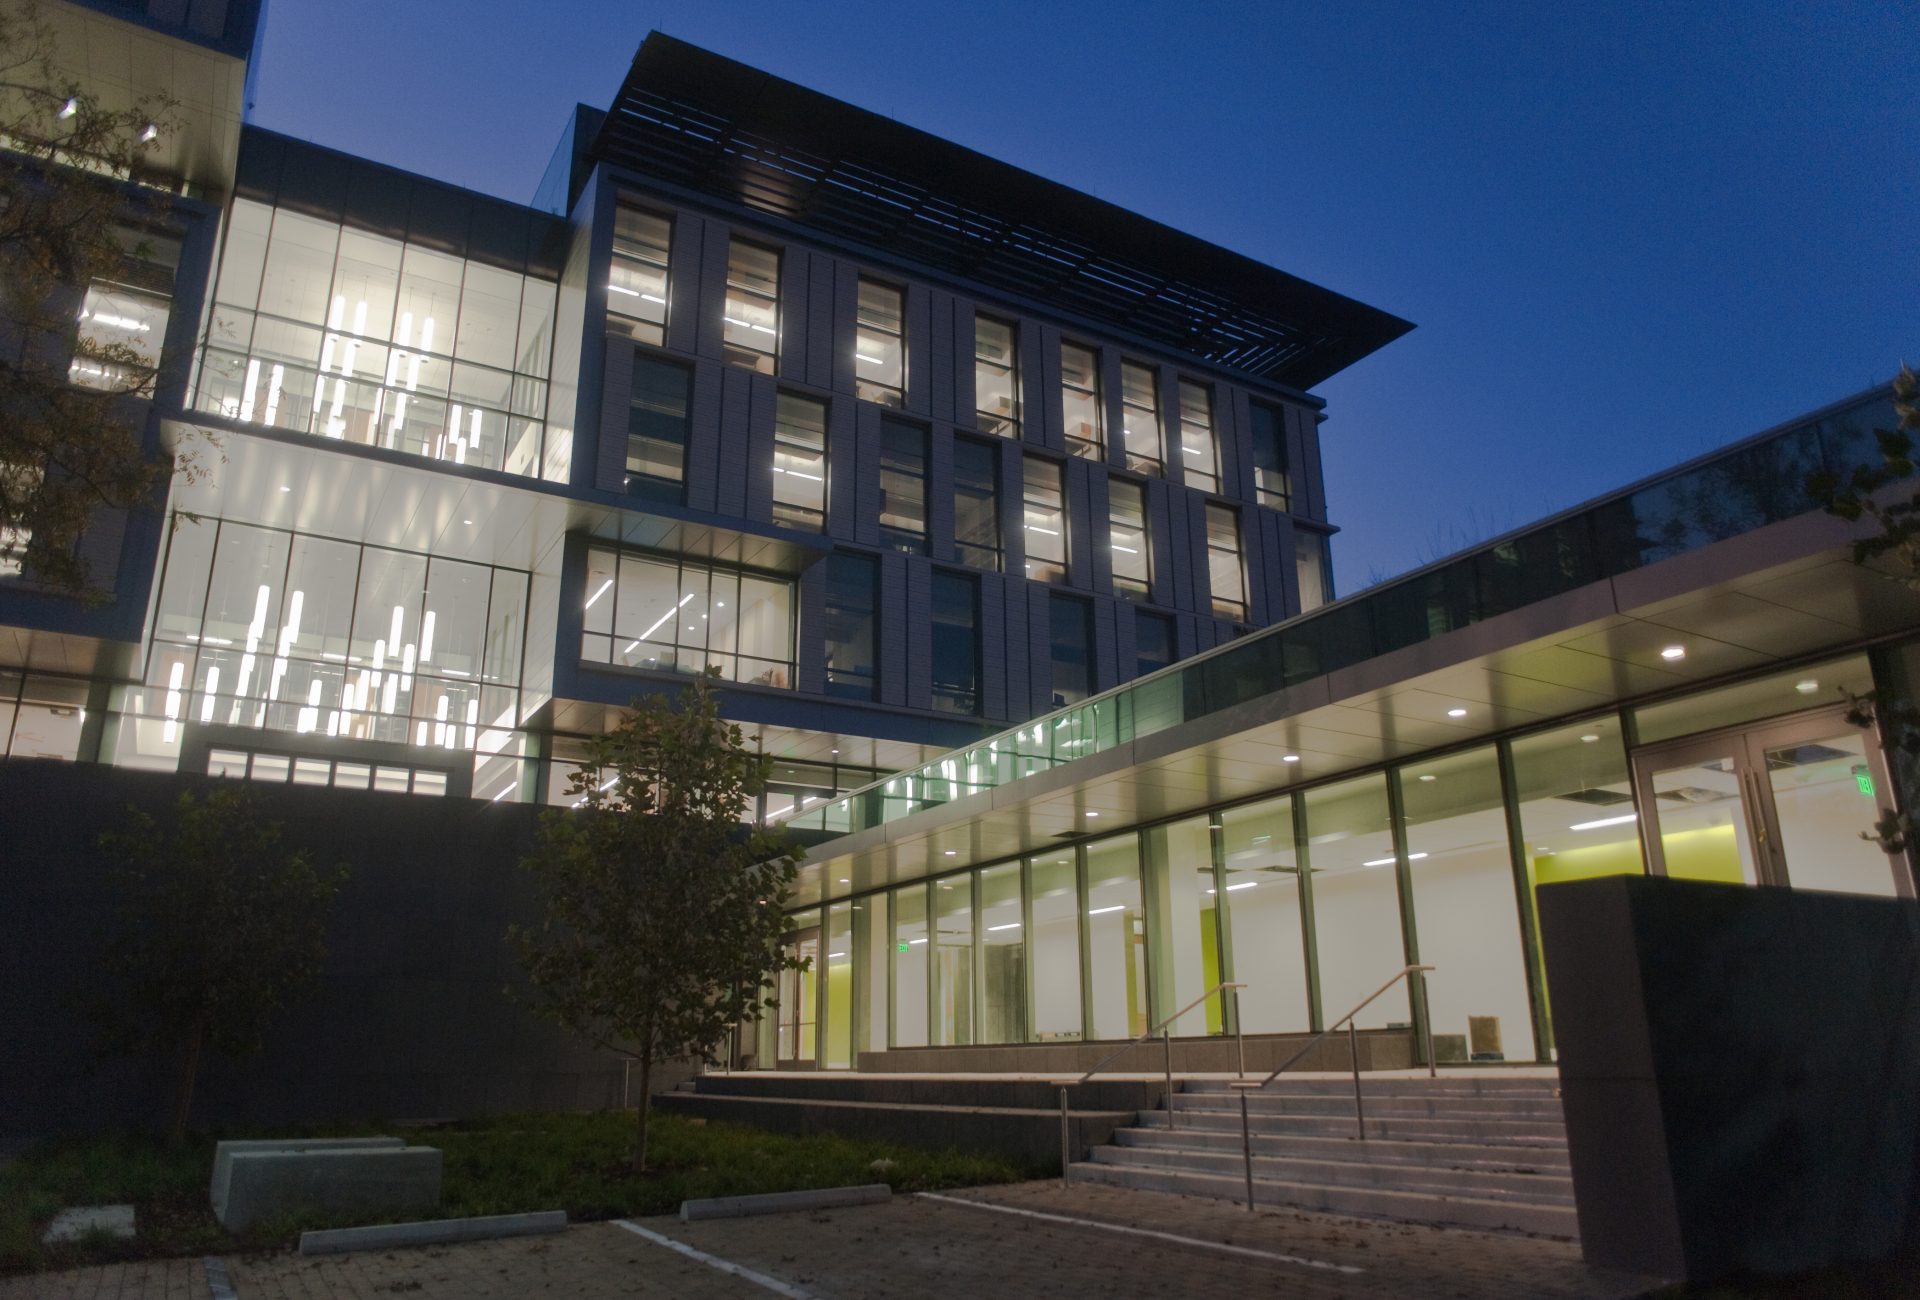 Exterior view of the new Liberal Arts Building